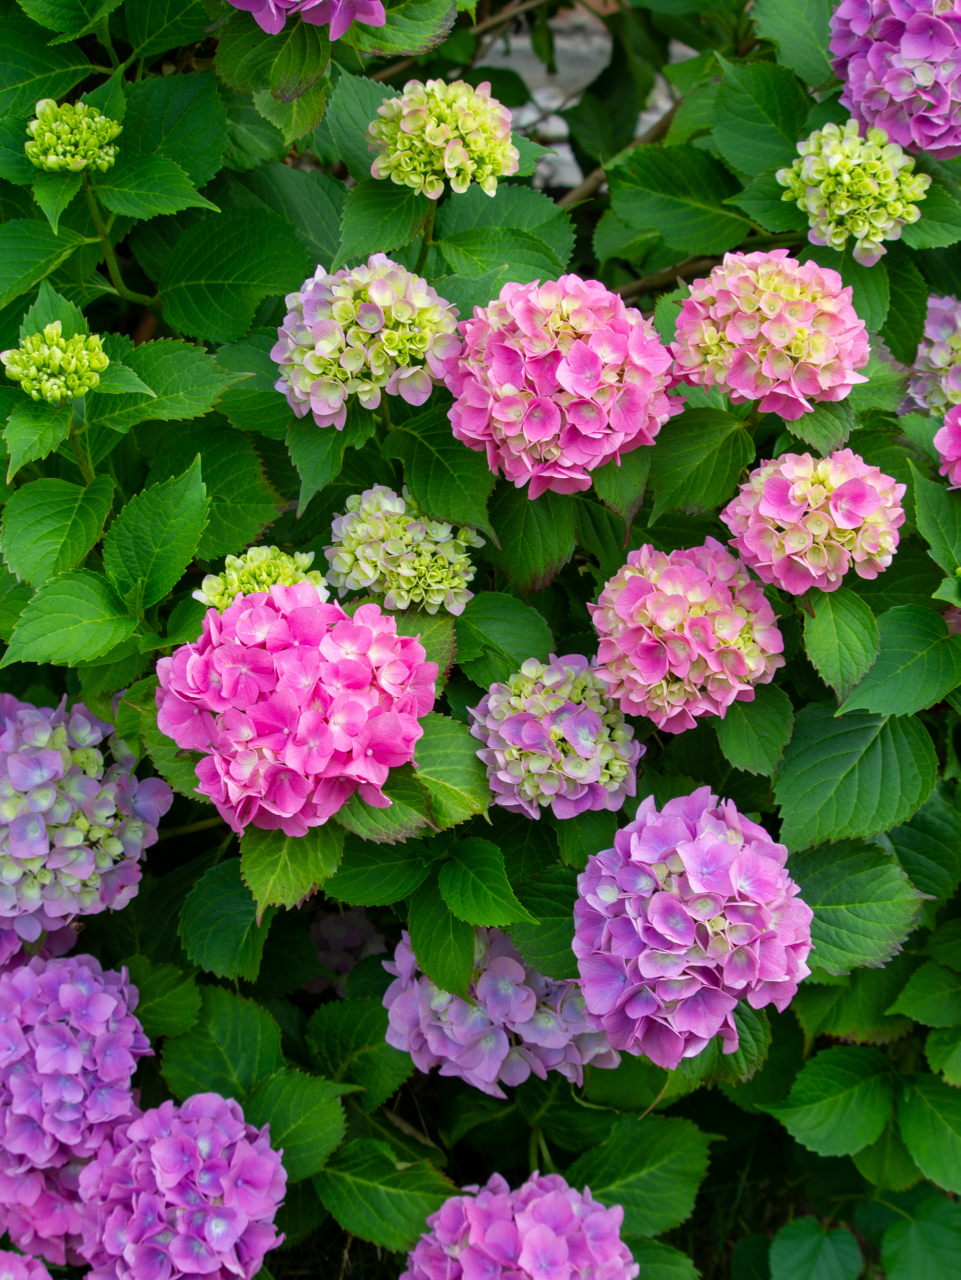 Image of a hydrangea plant with pink flowers.